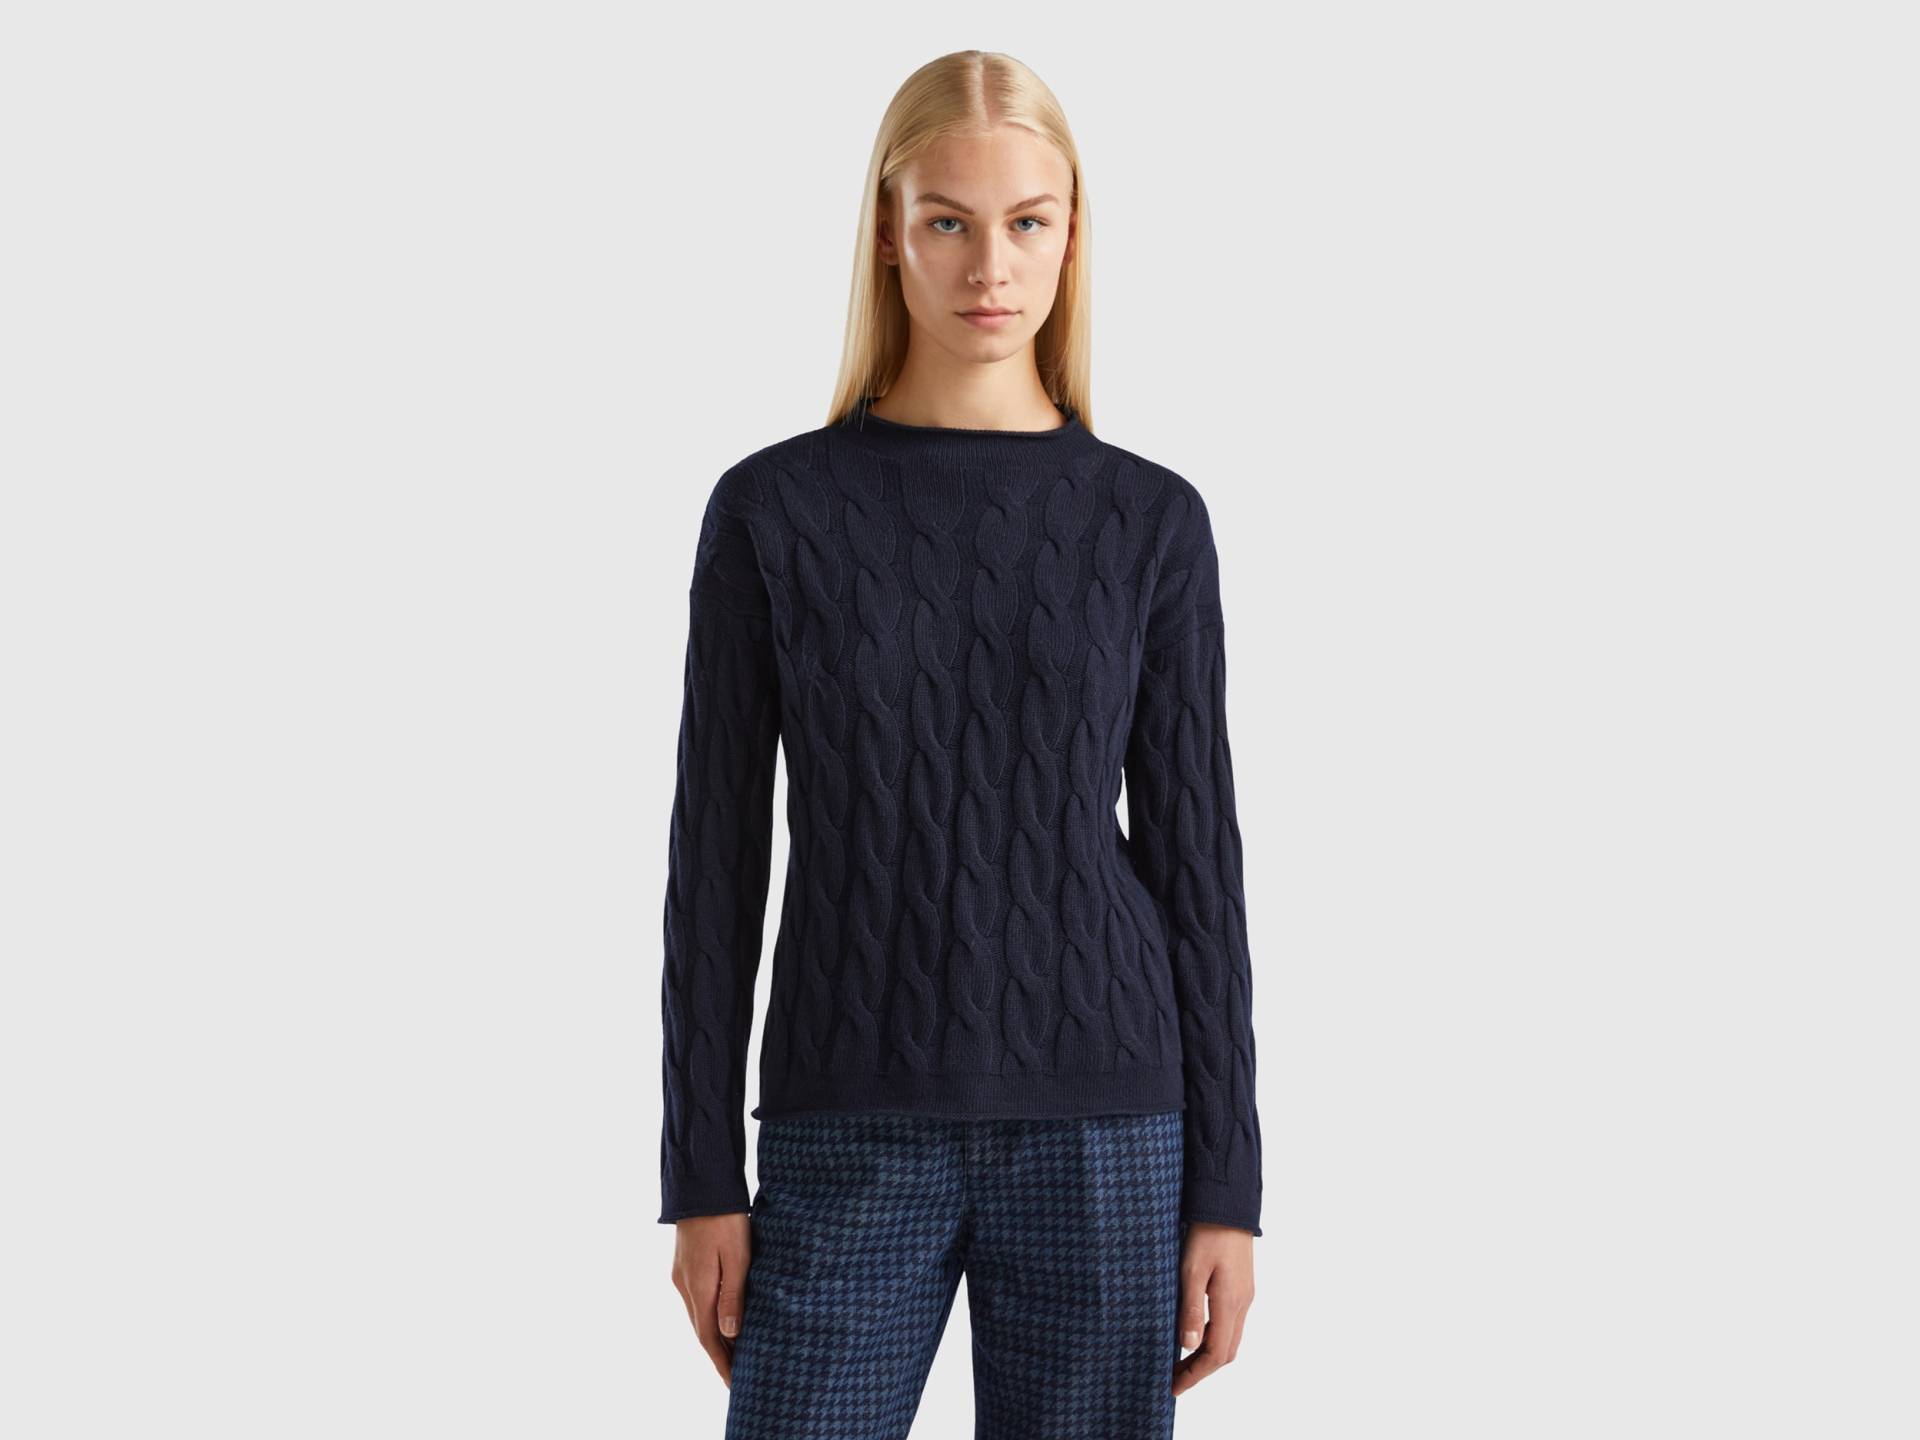 United Colors of Benetton Strickpullover, mit Zopfstrick-Muster von United Colors of Benetton